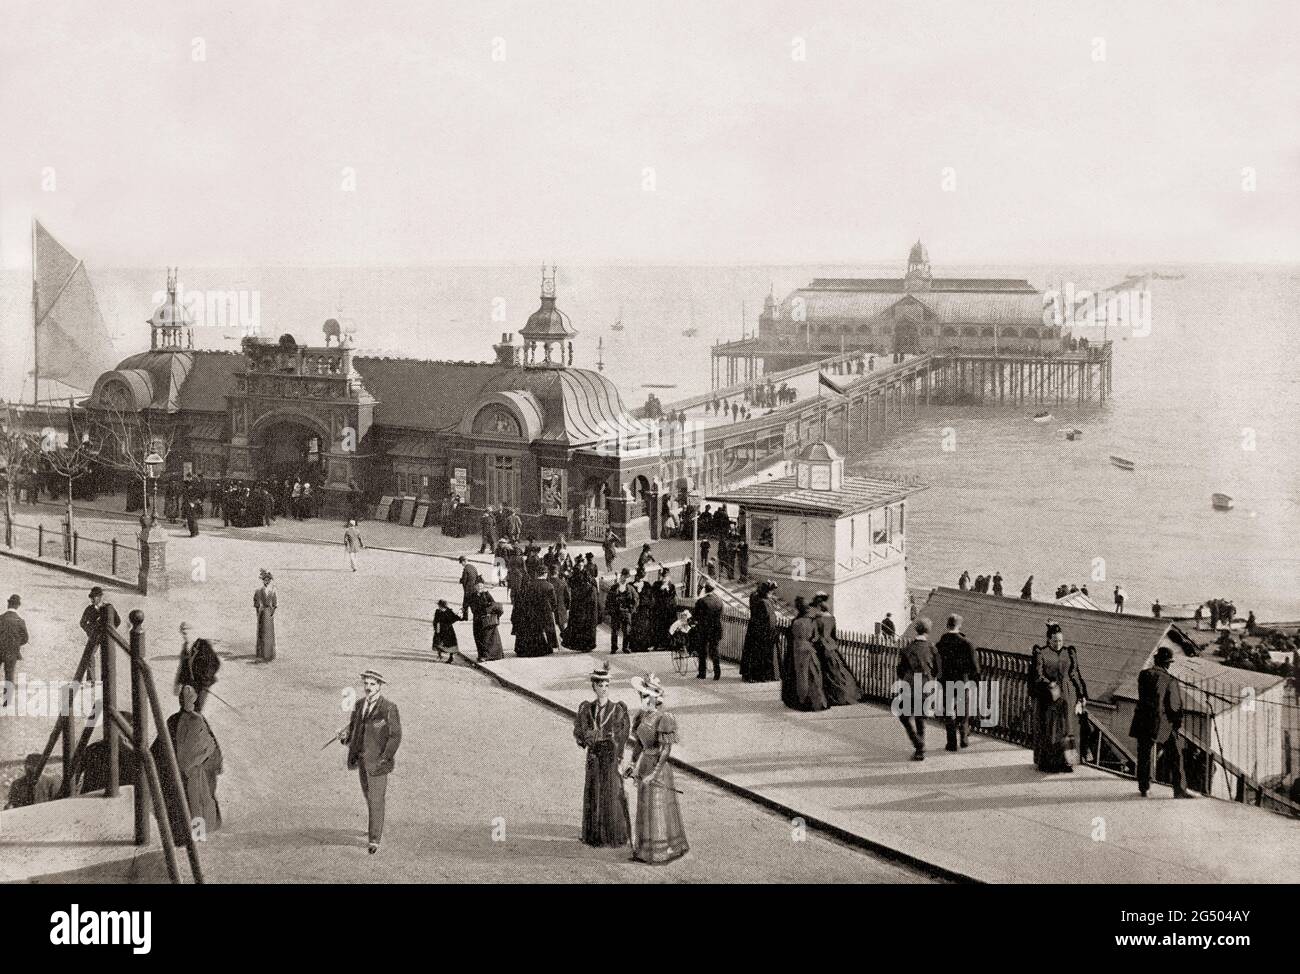 A late 19th century view of the world's longest pleasure pier, built in 1830 and stretching some 1.34 miles (2.16 km) from shore in Southend-on-Sea aka Southend, in Essex, England on the north side of the Thames Estuary. Originally a few poor fishermen's huts and farms at the southern end of the village of Prittlewell it became ta seaside resort grew after a visit from Princess Caroline of Brunswick. Stock Photo